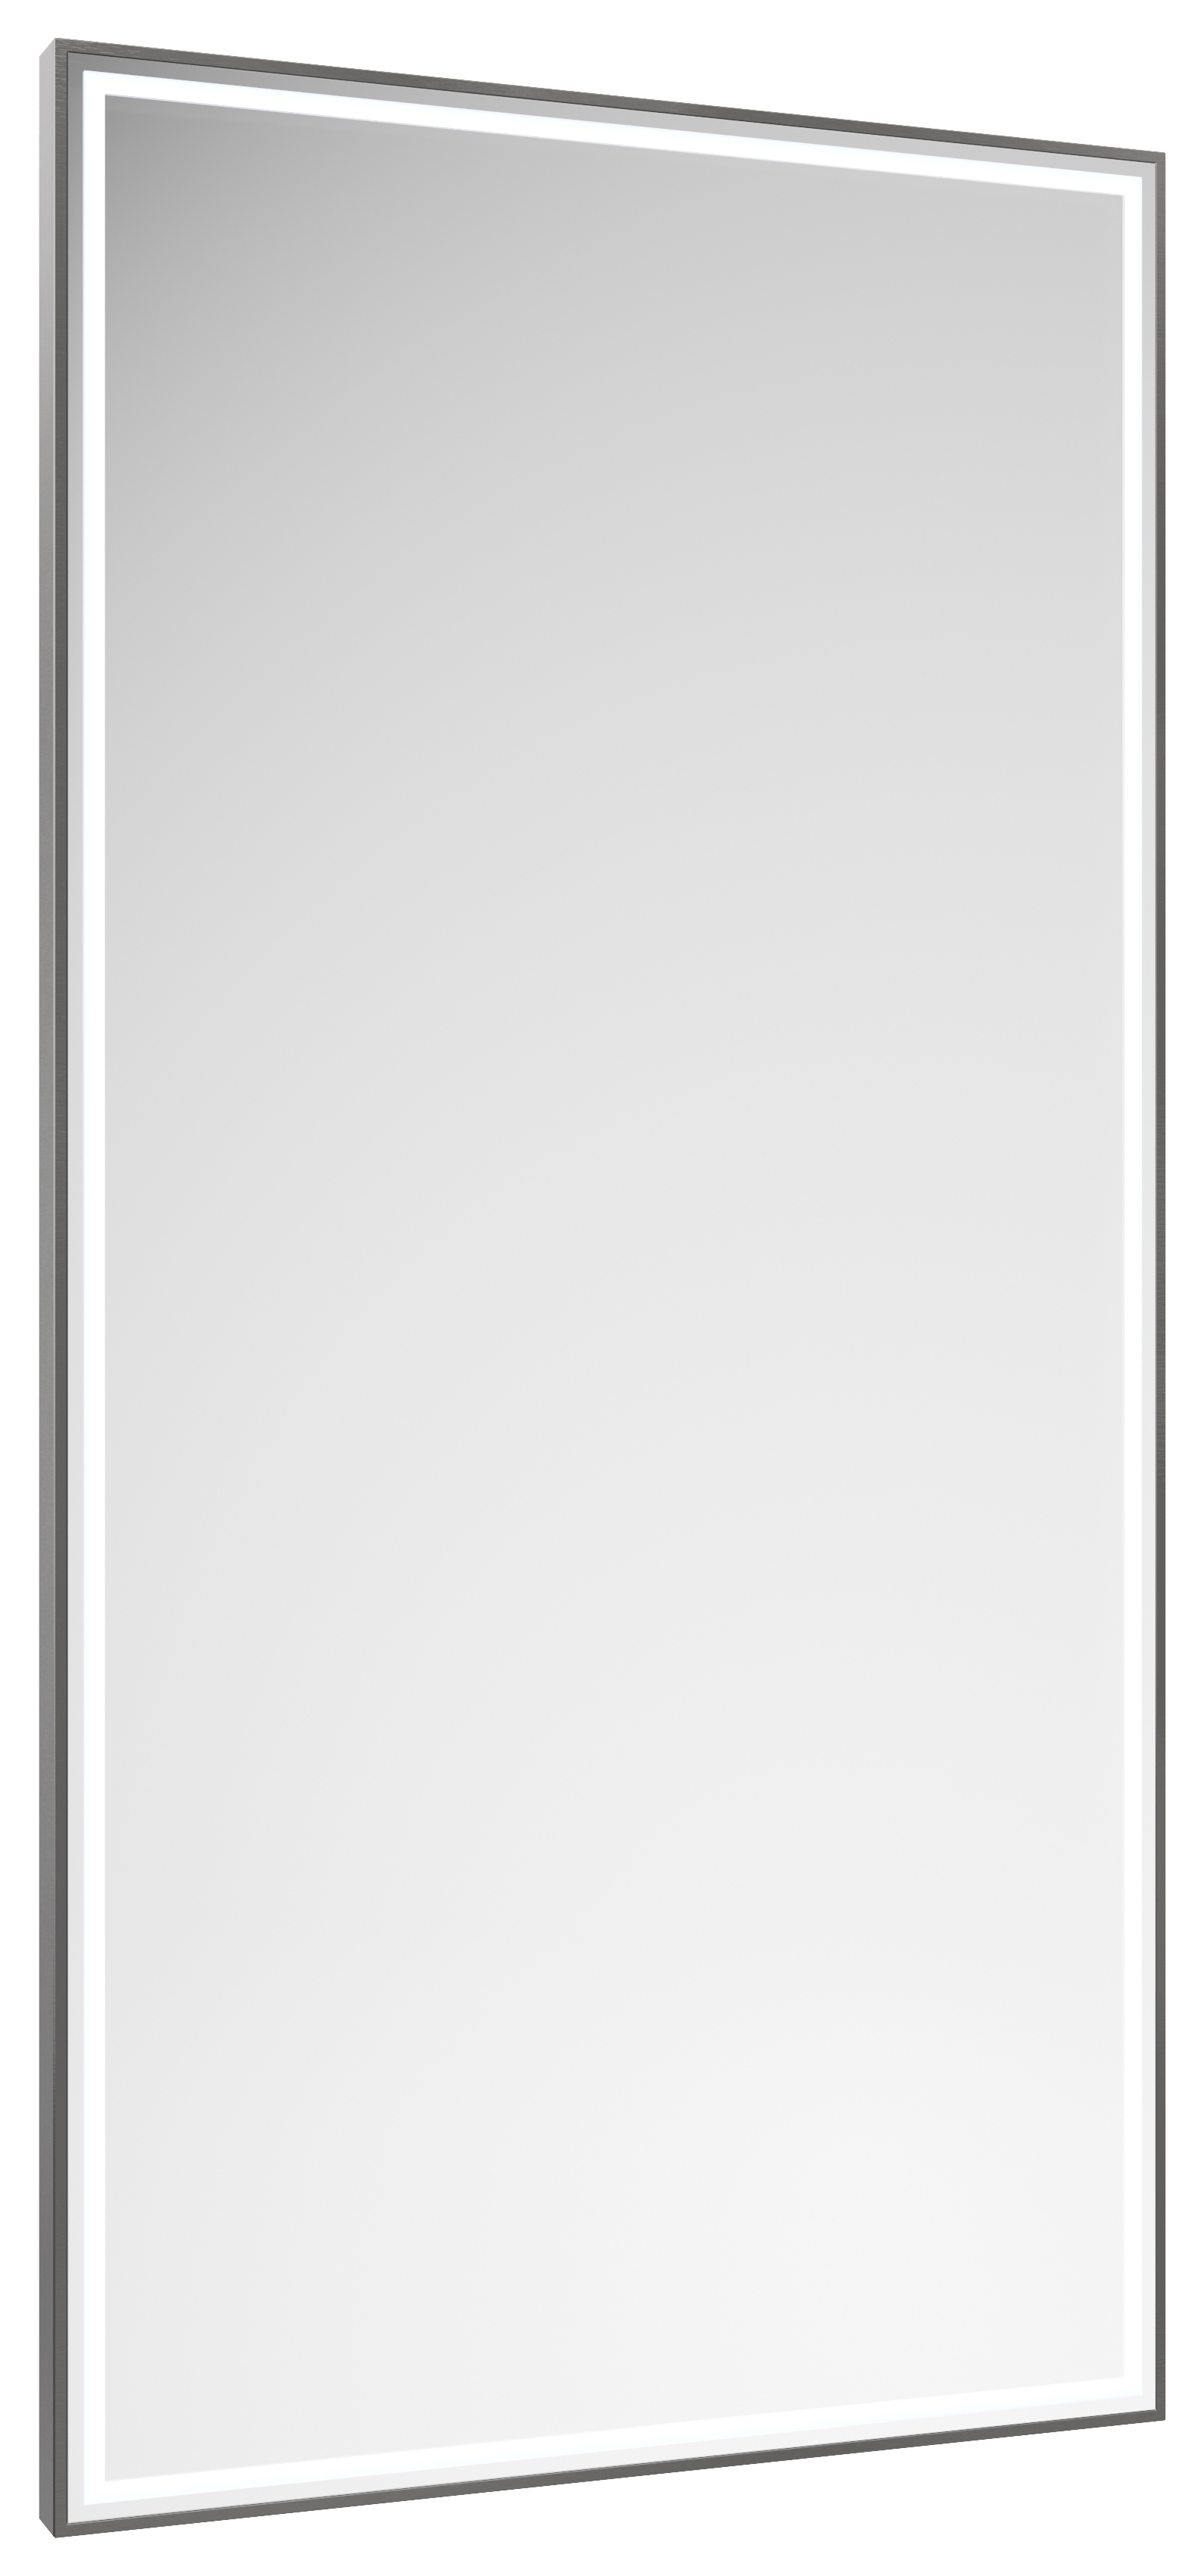 Image of Abacus Melford Anthracite LED Mirror with Demister - 800 x 500mm